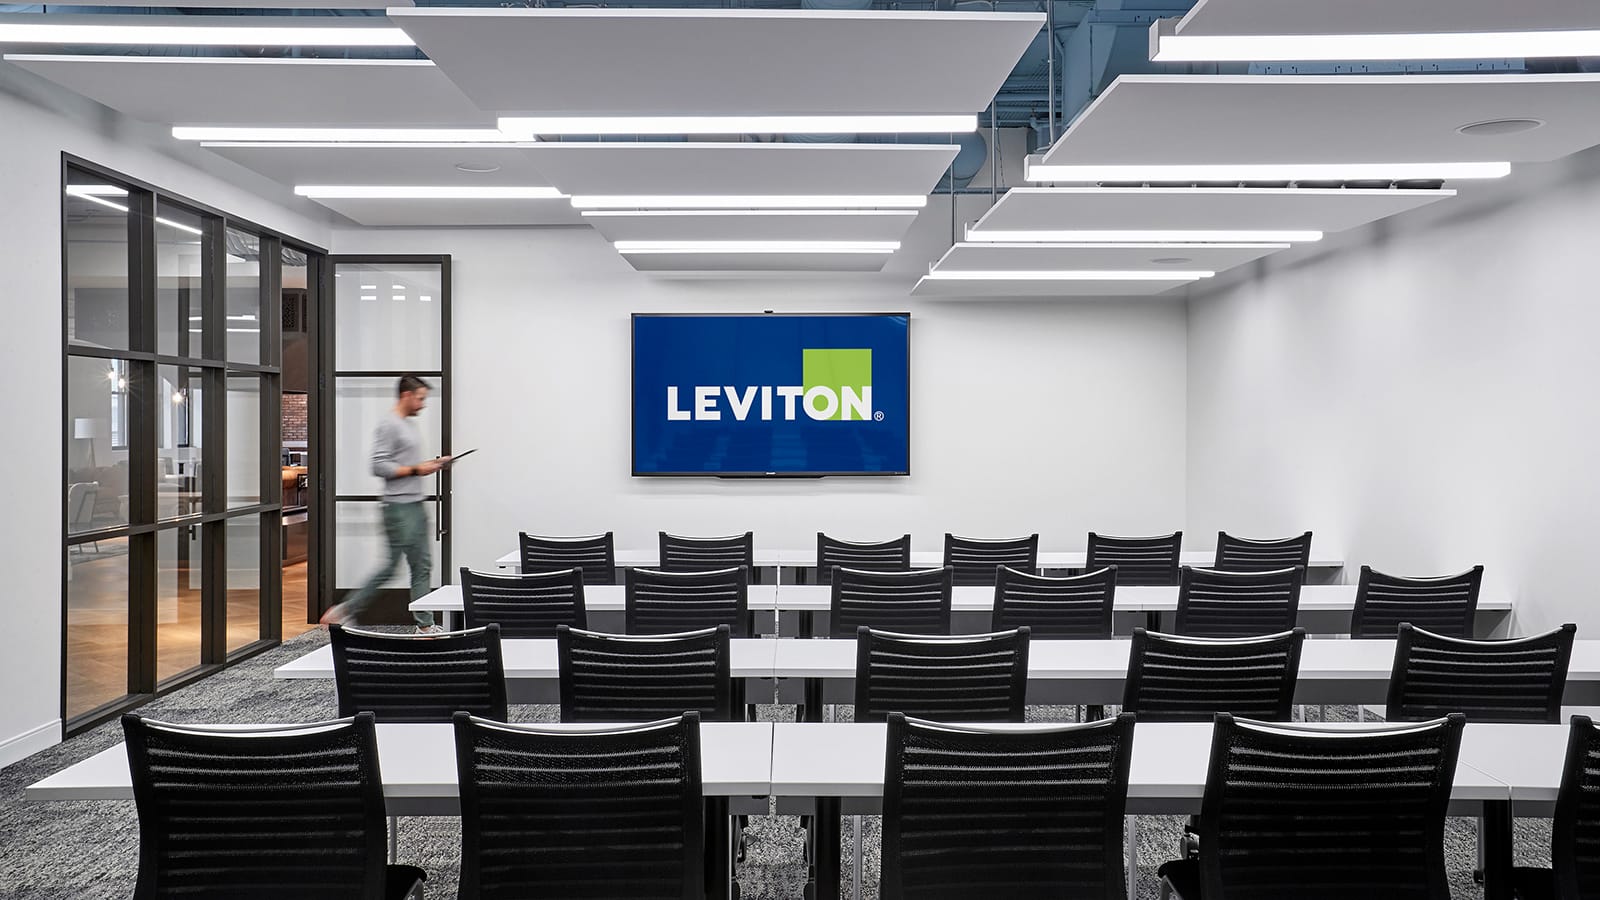 Leviton training and conference space